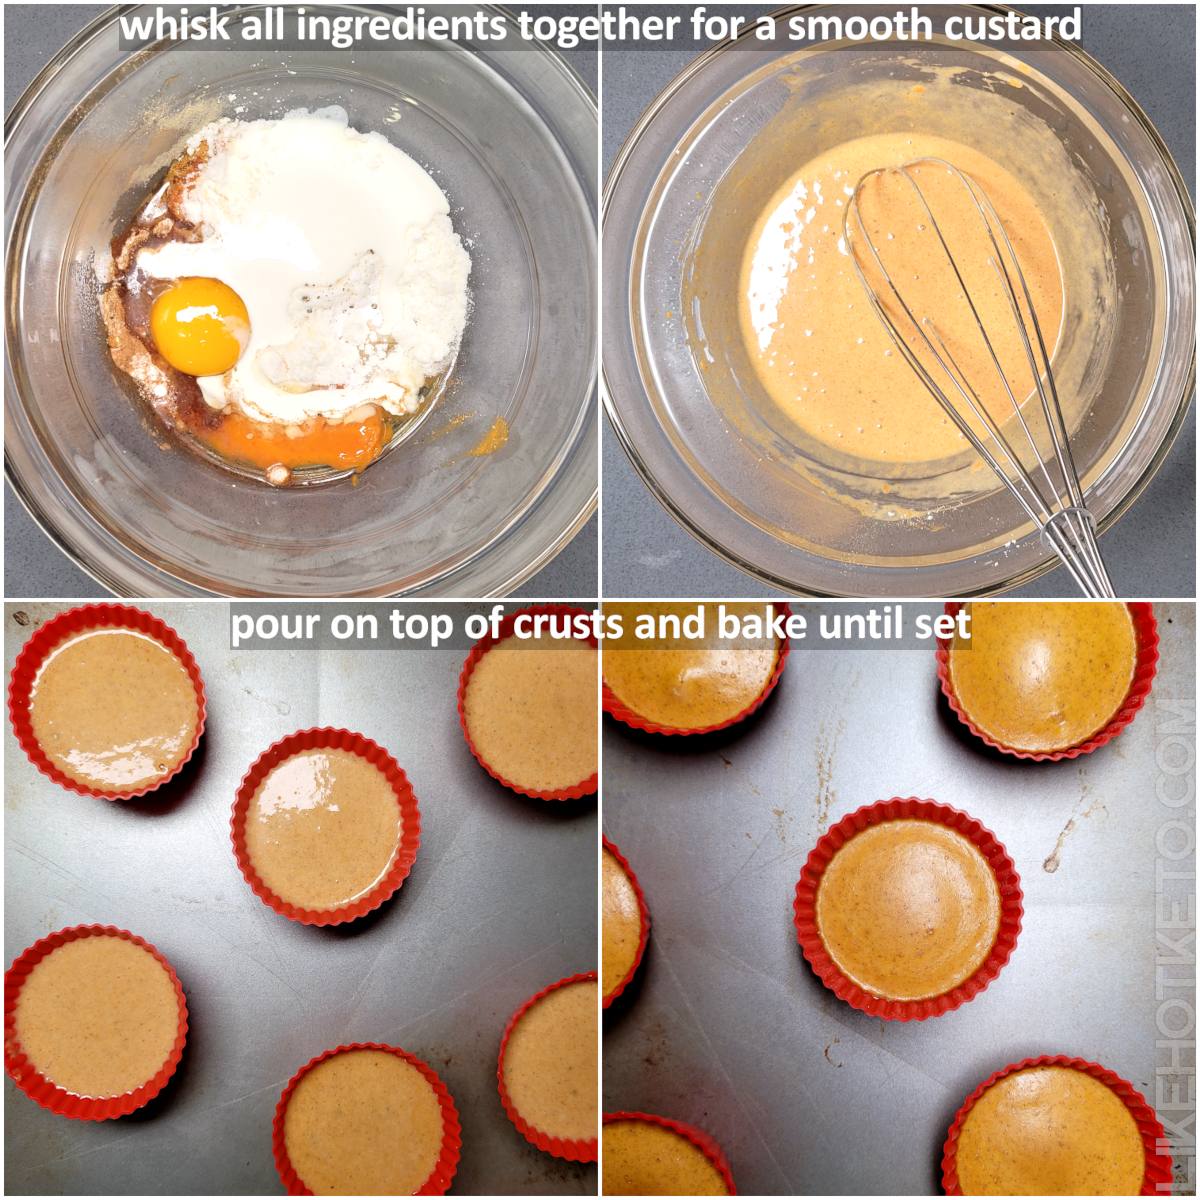 Steps to make the keto mini pumpkin pie batter: mix the ingredients, the creamy custard, filling the muffin liners, and the baked mini pies.